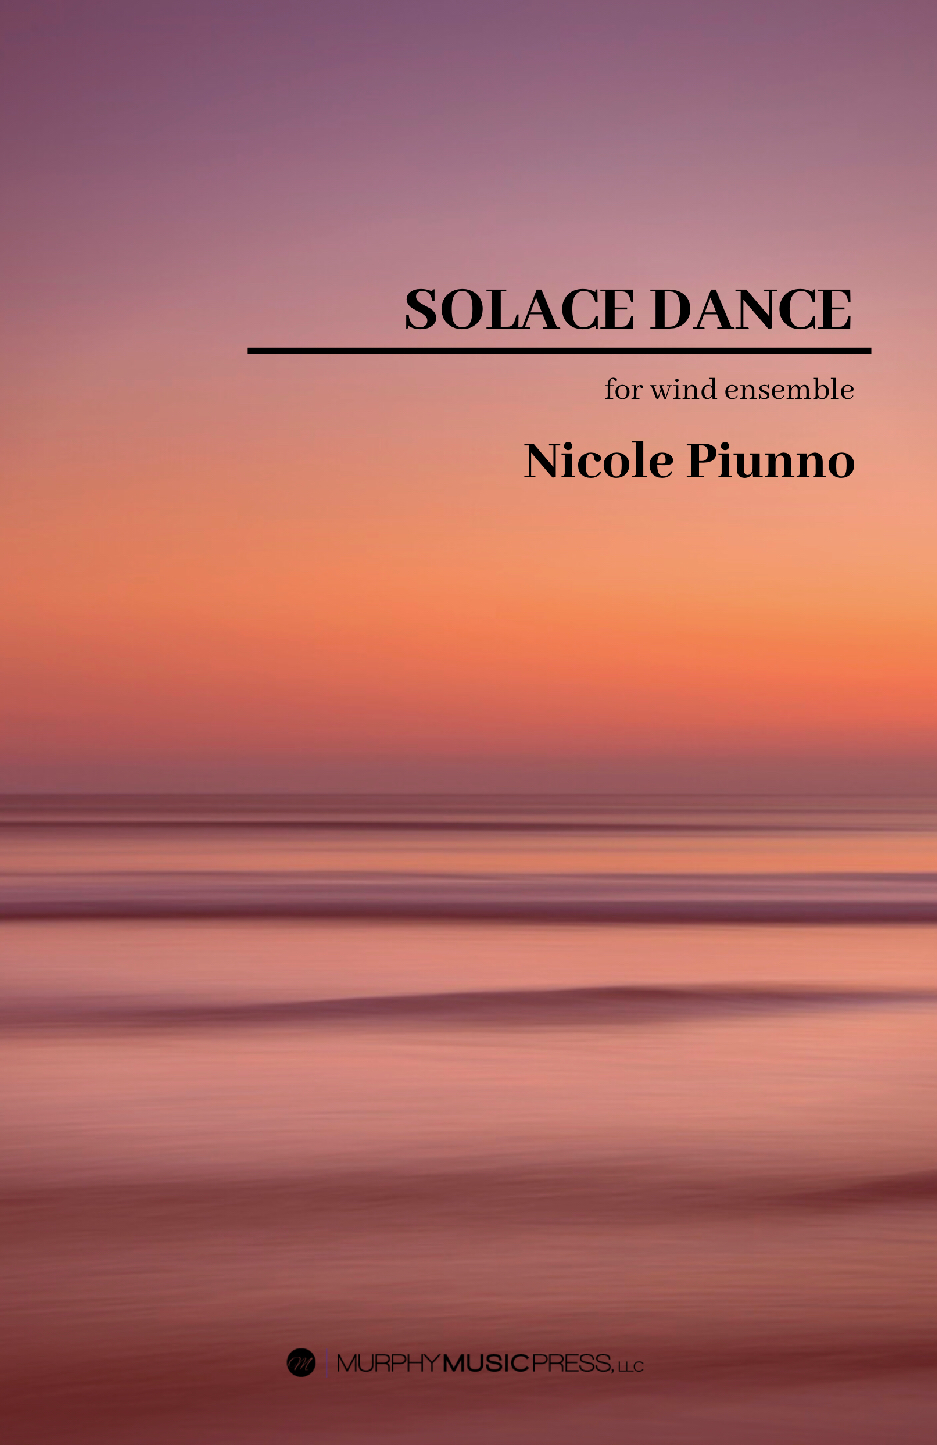 Solace Dance (Score Only) by Nicole Piunno